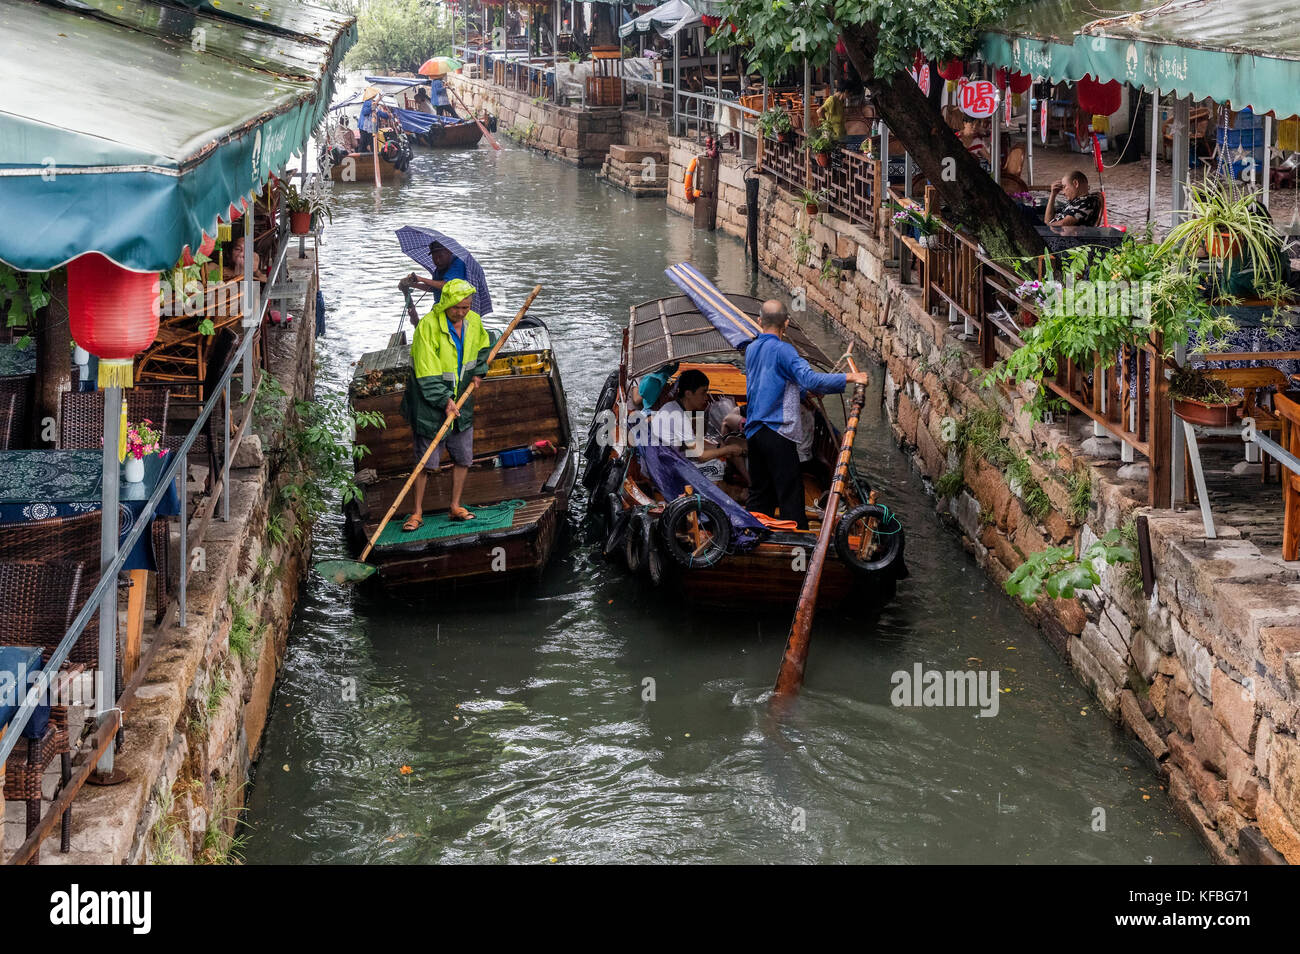 Stock Photo - Tourists ride in row boats in a canal in an ancient town in China, a woman is rowing one of the boat a man is rowing the other Stock Photo